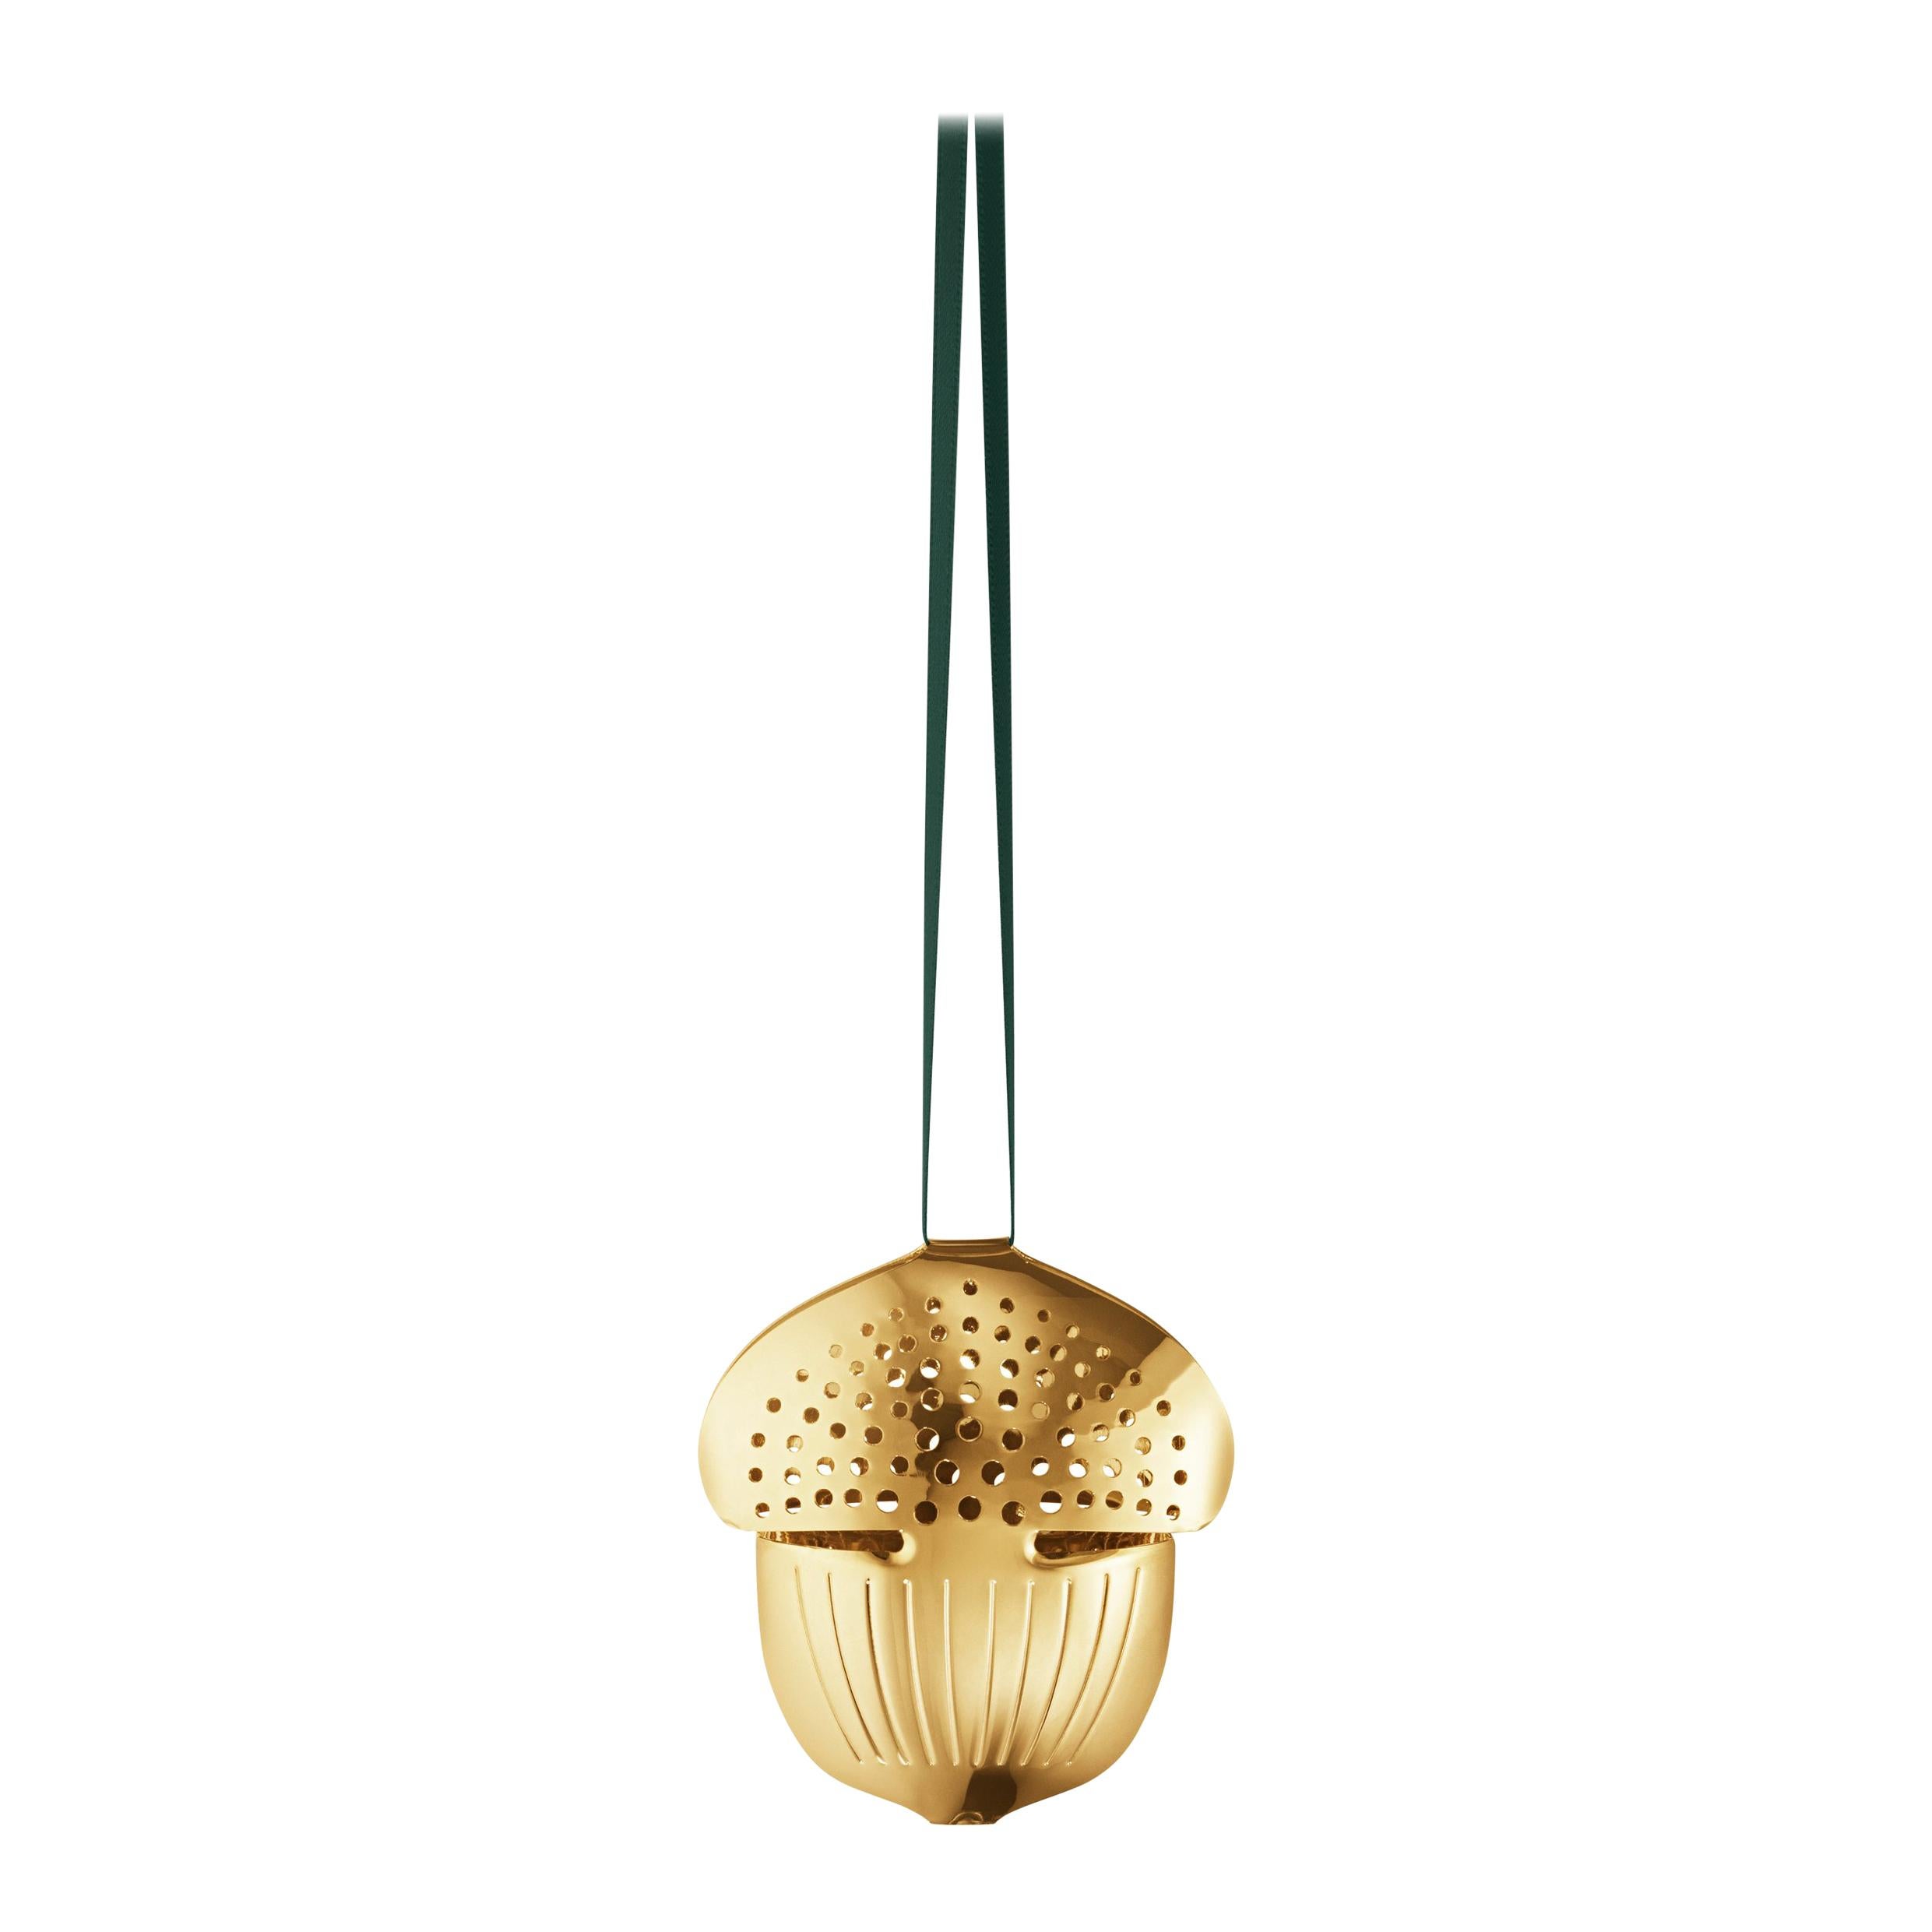 2018 Christmas Acorn Ornament in Gold by Georg Jensen